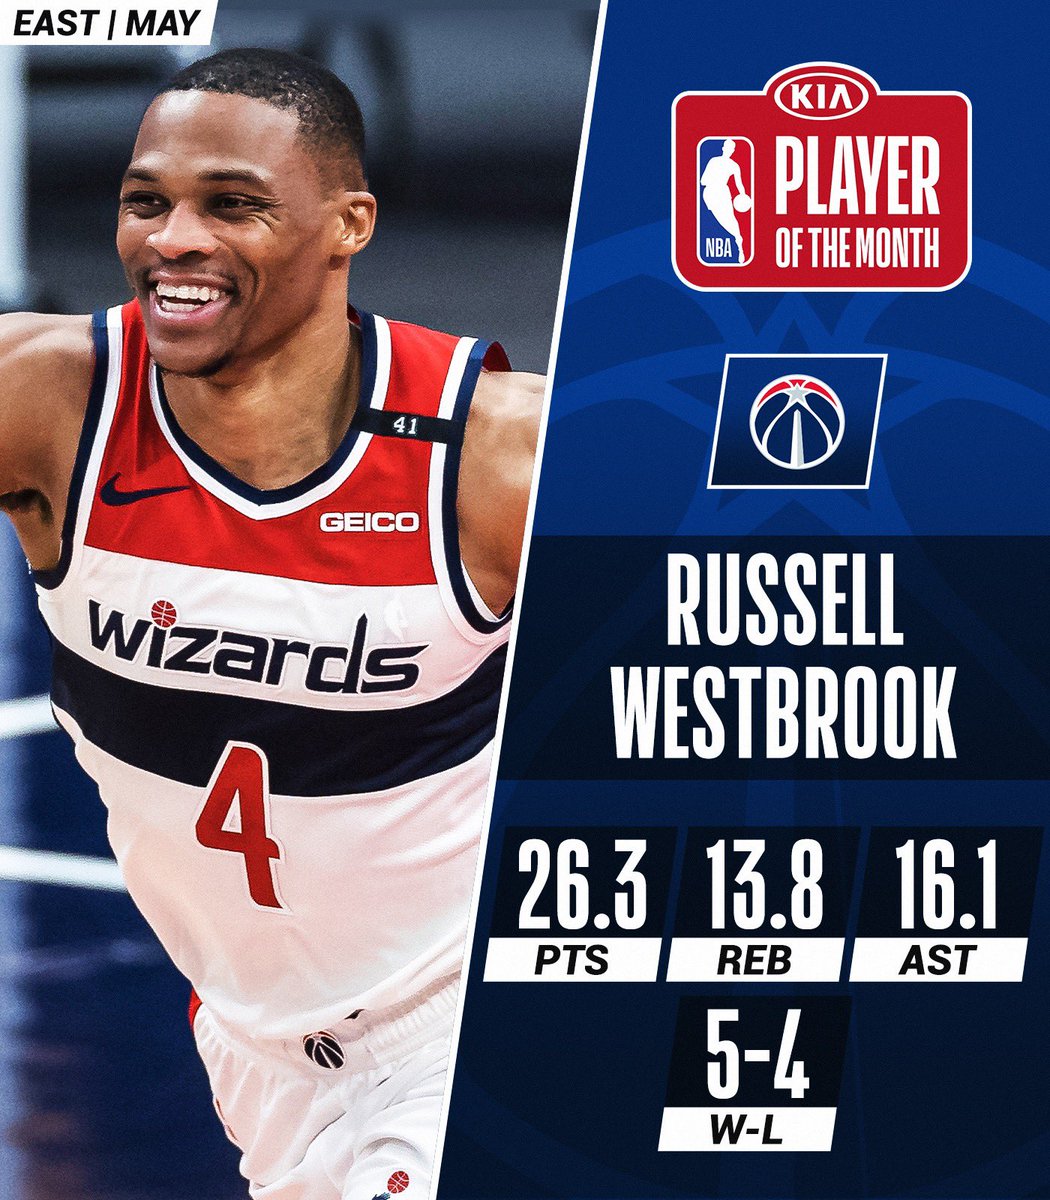 The Kia NBA Players of the Month for May! #KiaPOTM

West: @StephenCurry30 (@warriors)
East: @russwest44 (@WashWizards)